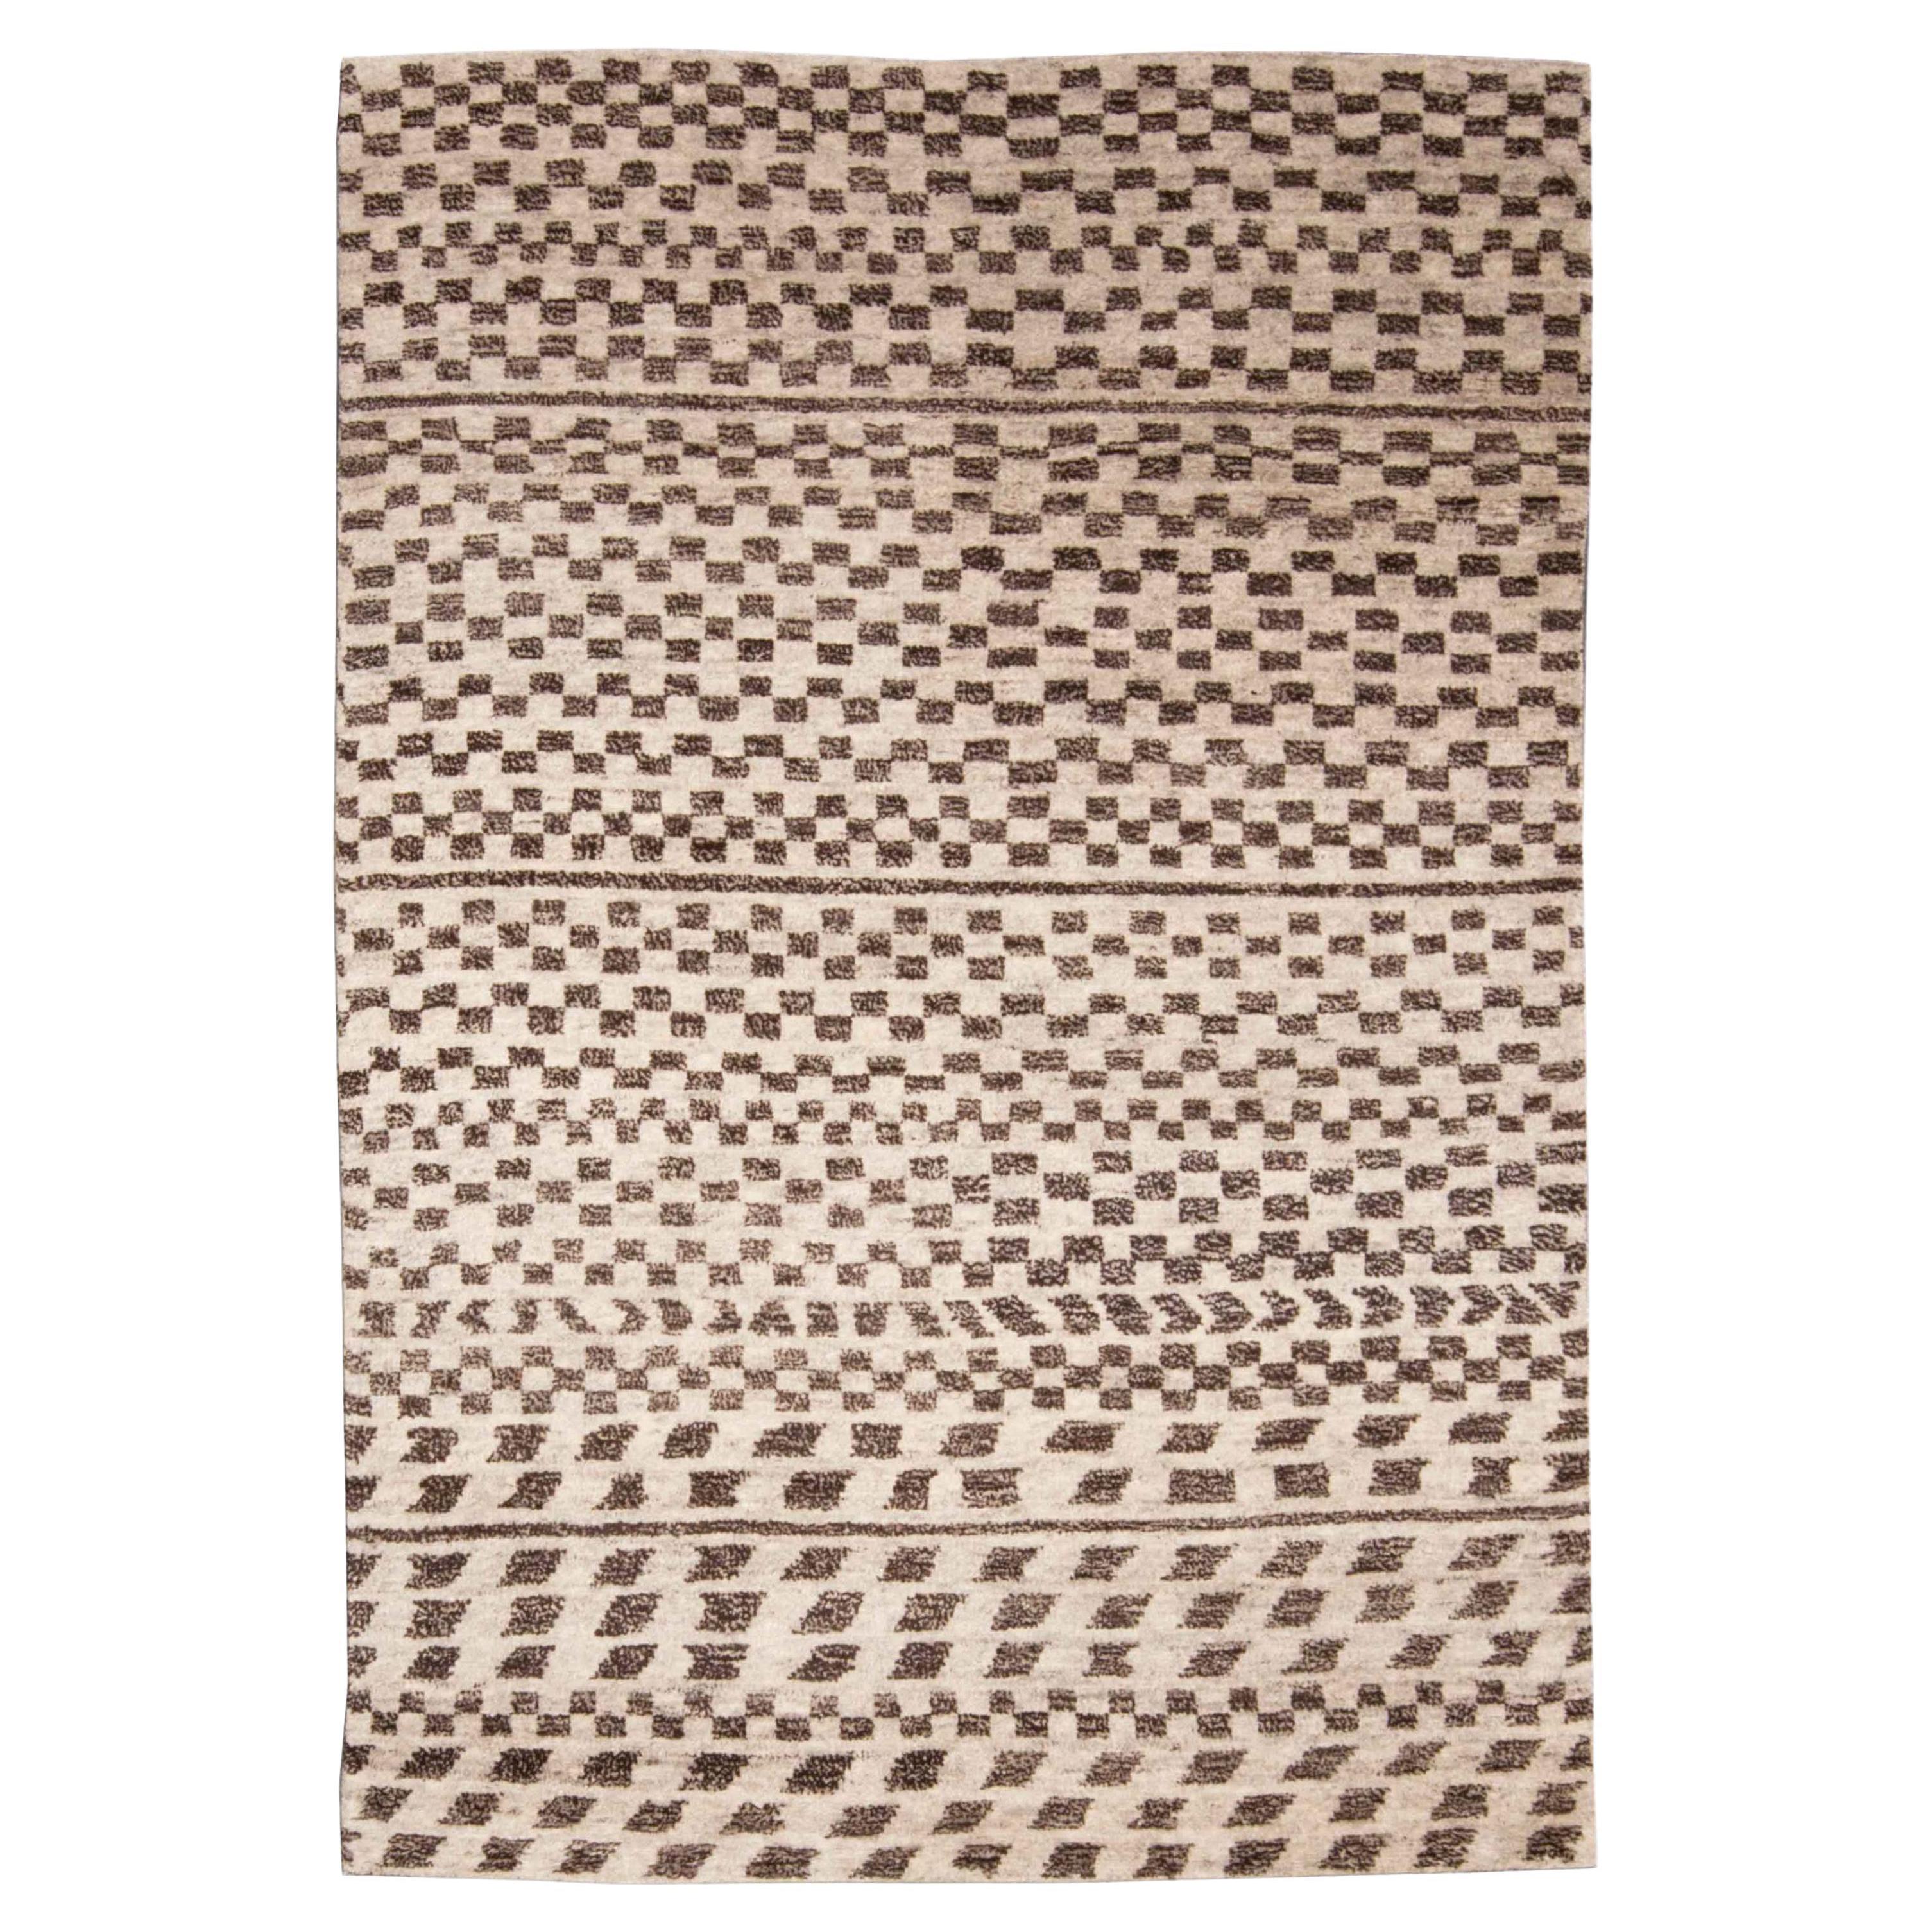 Contemporary Tribal Moroccan Style Hand-Knotted Wool Rug by Doris Leslie Blau